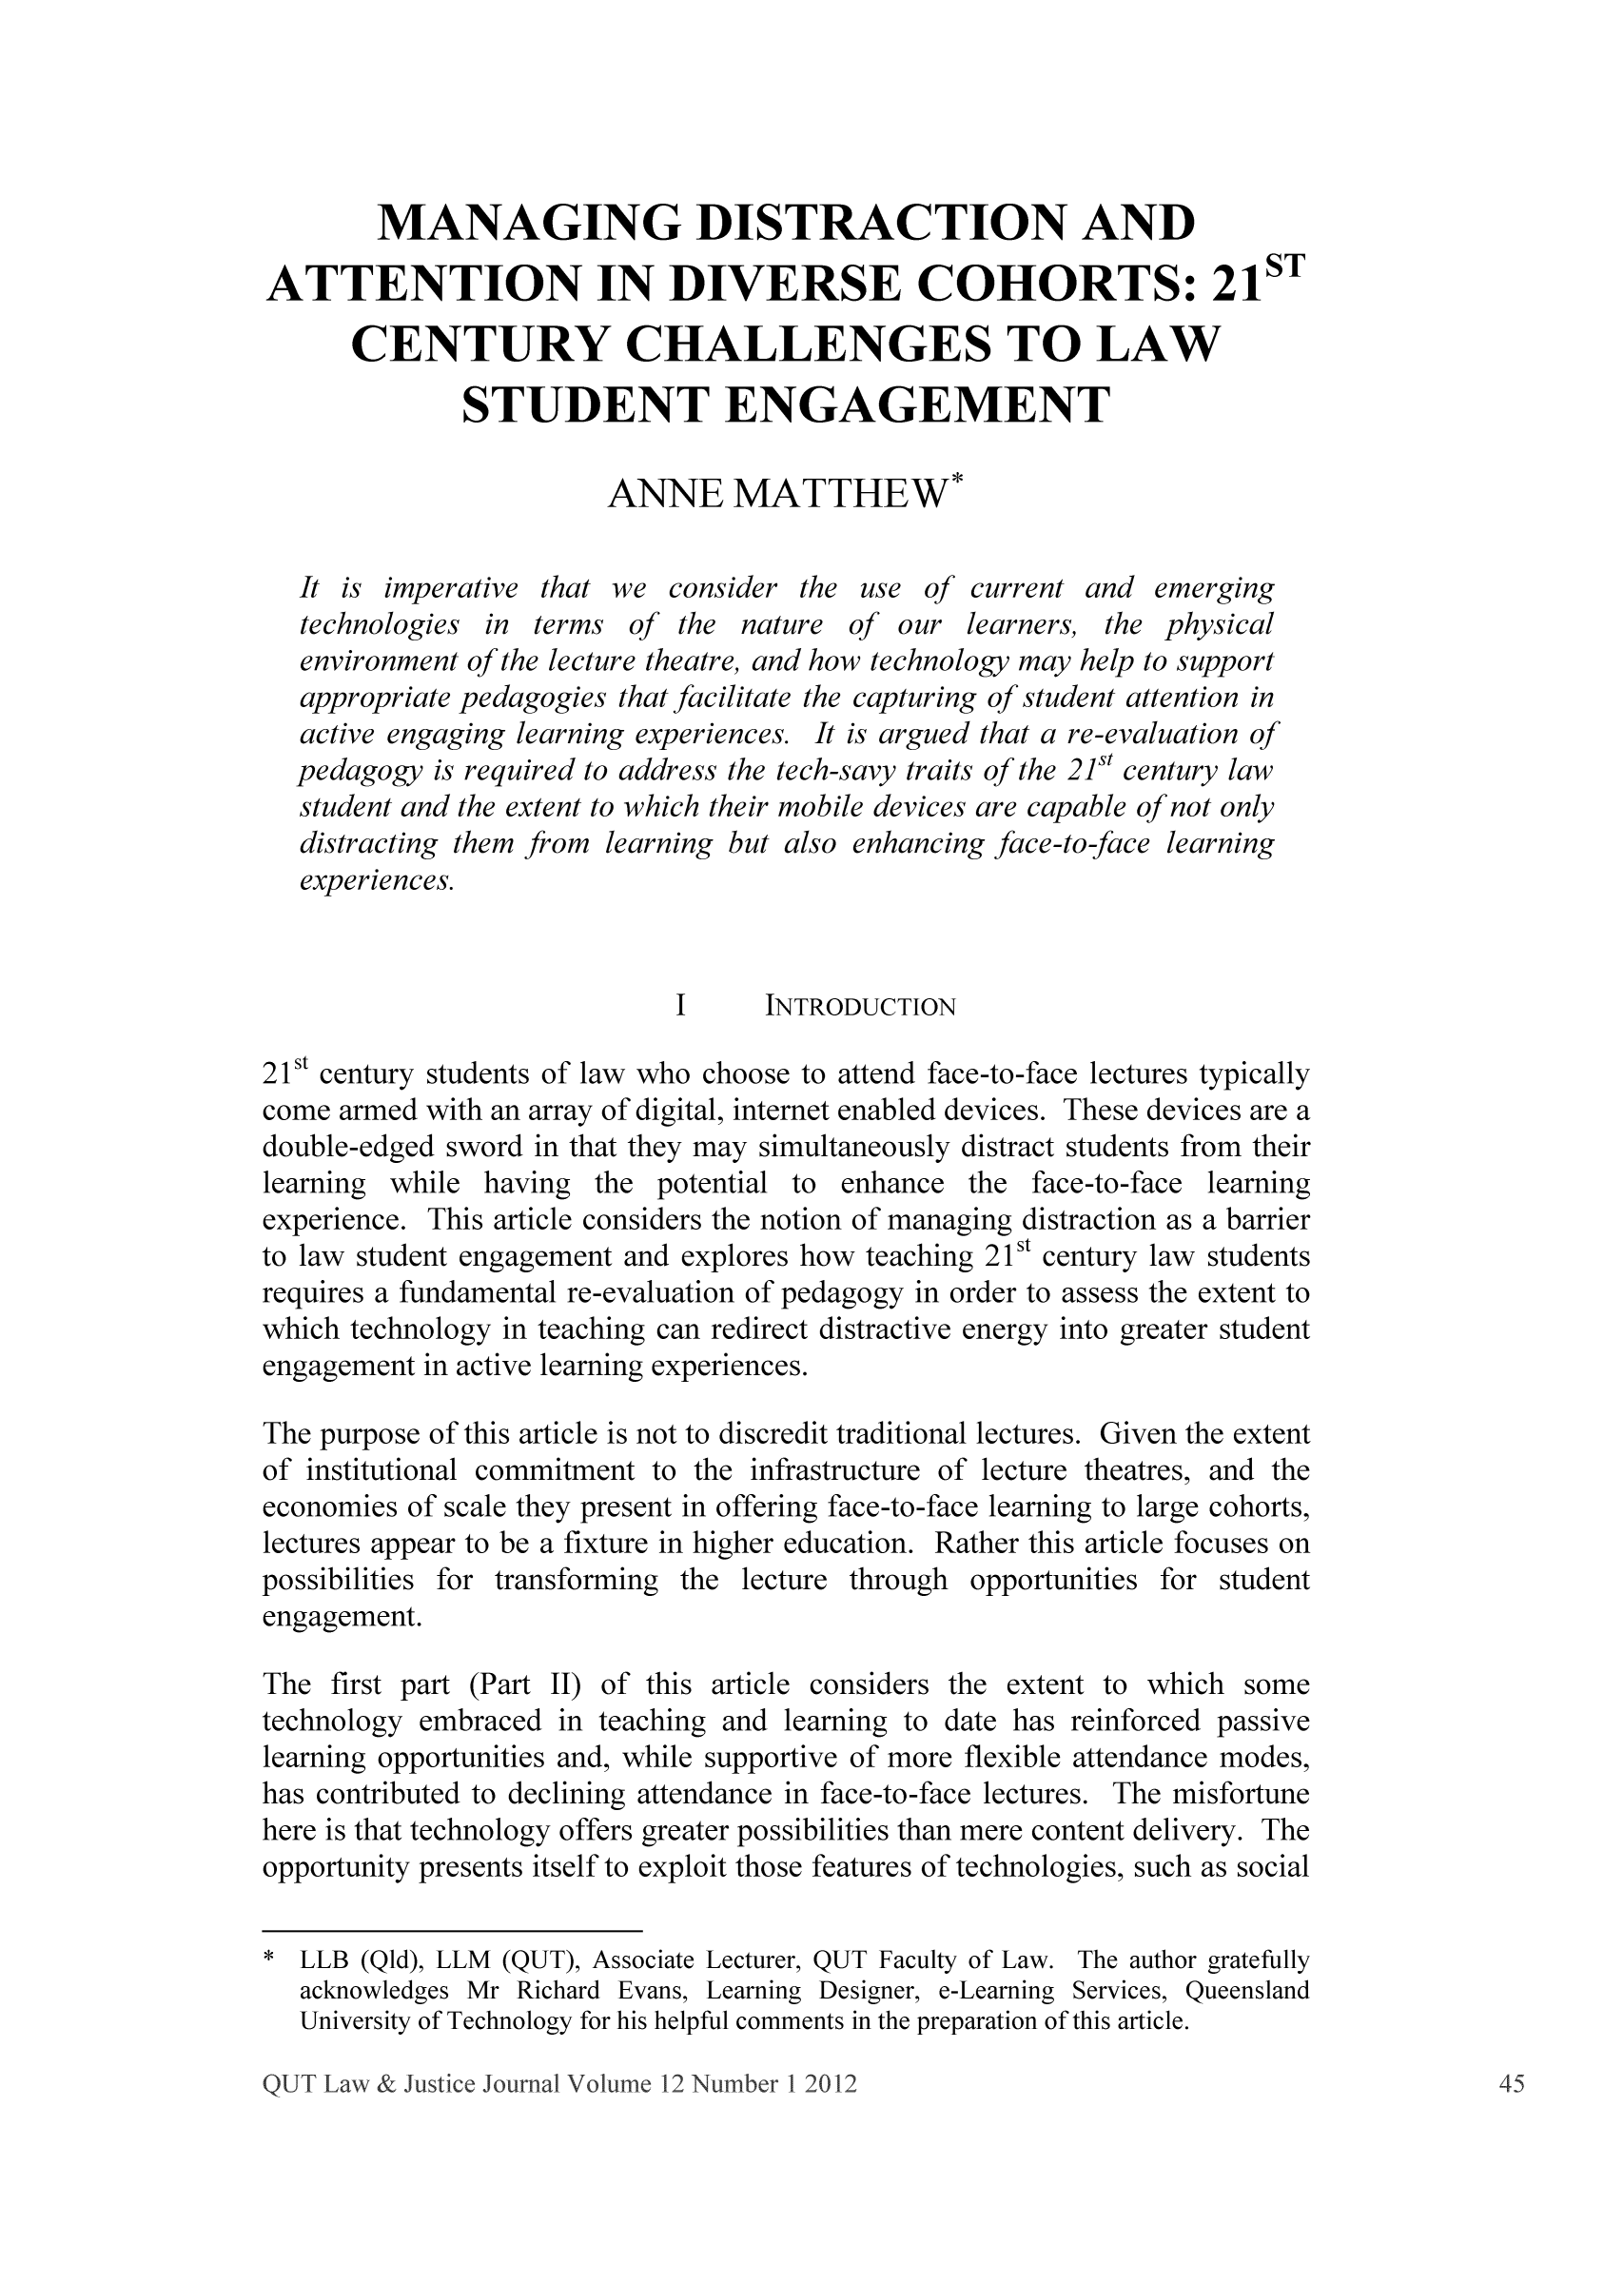 handle is hein.journals/qutlj12 and id is 47 raw text is: MANAGING DISTRACTION AND
ATTENTION IN DIVERSE COHORTS: 21ST
CENTURY CHALLENGES TO LAW
STUDENT ENGAGEMENT
ANNE MATTHEW*
It is imperative that we consider the use of current and emerging
technologies in terms of the nature of our learners, the physical
environment ofthe lecture theatre, and how technology may help to support
appropriate pedagogies that facilitate the capturing of student attention in
active engaging learning experiences. It is argued that a re-evaluation of
pedagogy is required to address the tech-savy traits of the 21st century law
student and the extent to which their mobile devices are capable of not only
distracting them from learning but also enhancing face-to-face learning
experiences.
I     INTRODUCTION
21St century students of law who choose to attend face-to-face lectures typically
come armed with an array of digital, internet enabled devices. These devices are a
double-edged sword in that they may simultaneously distract students from their
learning while having the potential to enhance the face-to-face learning
experience. This article considers the notion of managing distraction as a barrier
to law student engagement and explores how teaching 21 st century law students
requires a fundamental re-evaluation of pedagogy in order to assess the extent to
which technology in teaching can redirect distractive energy into greater student
engagement in active learning experiences.
The purpose of this article is not to discredit traditional lectures. Given the extent
of institutional commitment to the infrastructure of lecture theatres, and the
economies of scale they present in offering face-to-face learning to large cohorts,
lectures appear to be a fixture in higher education. Rather this article focuses on
possibilities for transforming the lecture through opportunities for student
engagement.
The first part (Part II) of this article considers the extent to which some
technology embraced in teaching and learning to date has reinforced passive
learning opportunities and, while supportive of more flexible attendance modes,
has contributed to declining attendance in face-to-face lectures. The misfortune
here is that technology offers greater possibilities than mere content delivery. The
opportunity presents itself to exploit those features of technologies, such as social
*LLB (Qid), LLM (QUT), Associate Lecturer, QUT Faculty of Law. The author gratefully

acknowledges Mr Richard Evans, Learning Designer, e-Learning Services, Queensland
University of Technology for his helpful comments in the preparation of this article.


